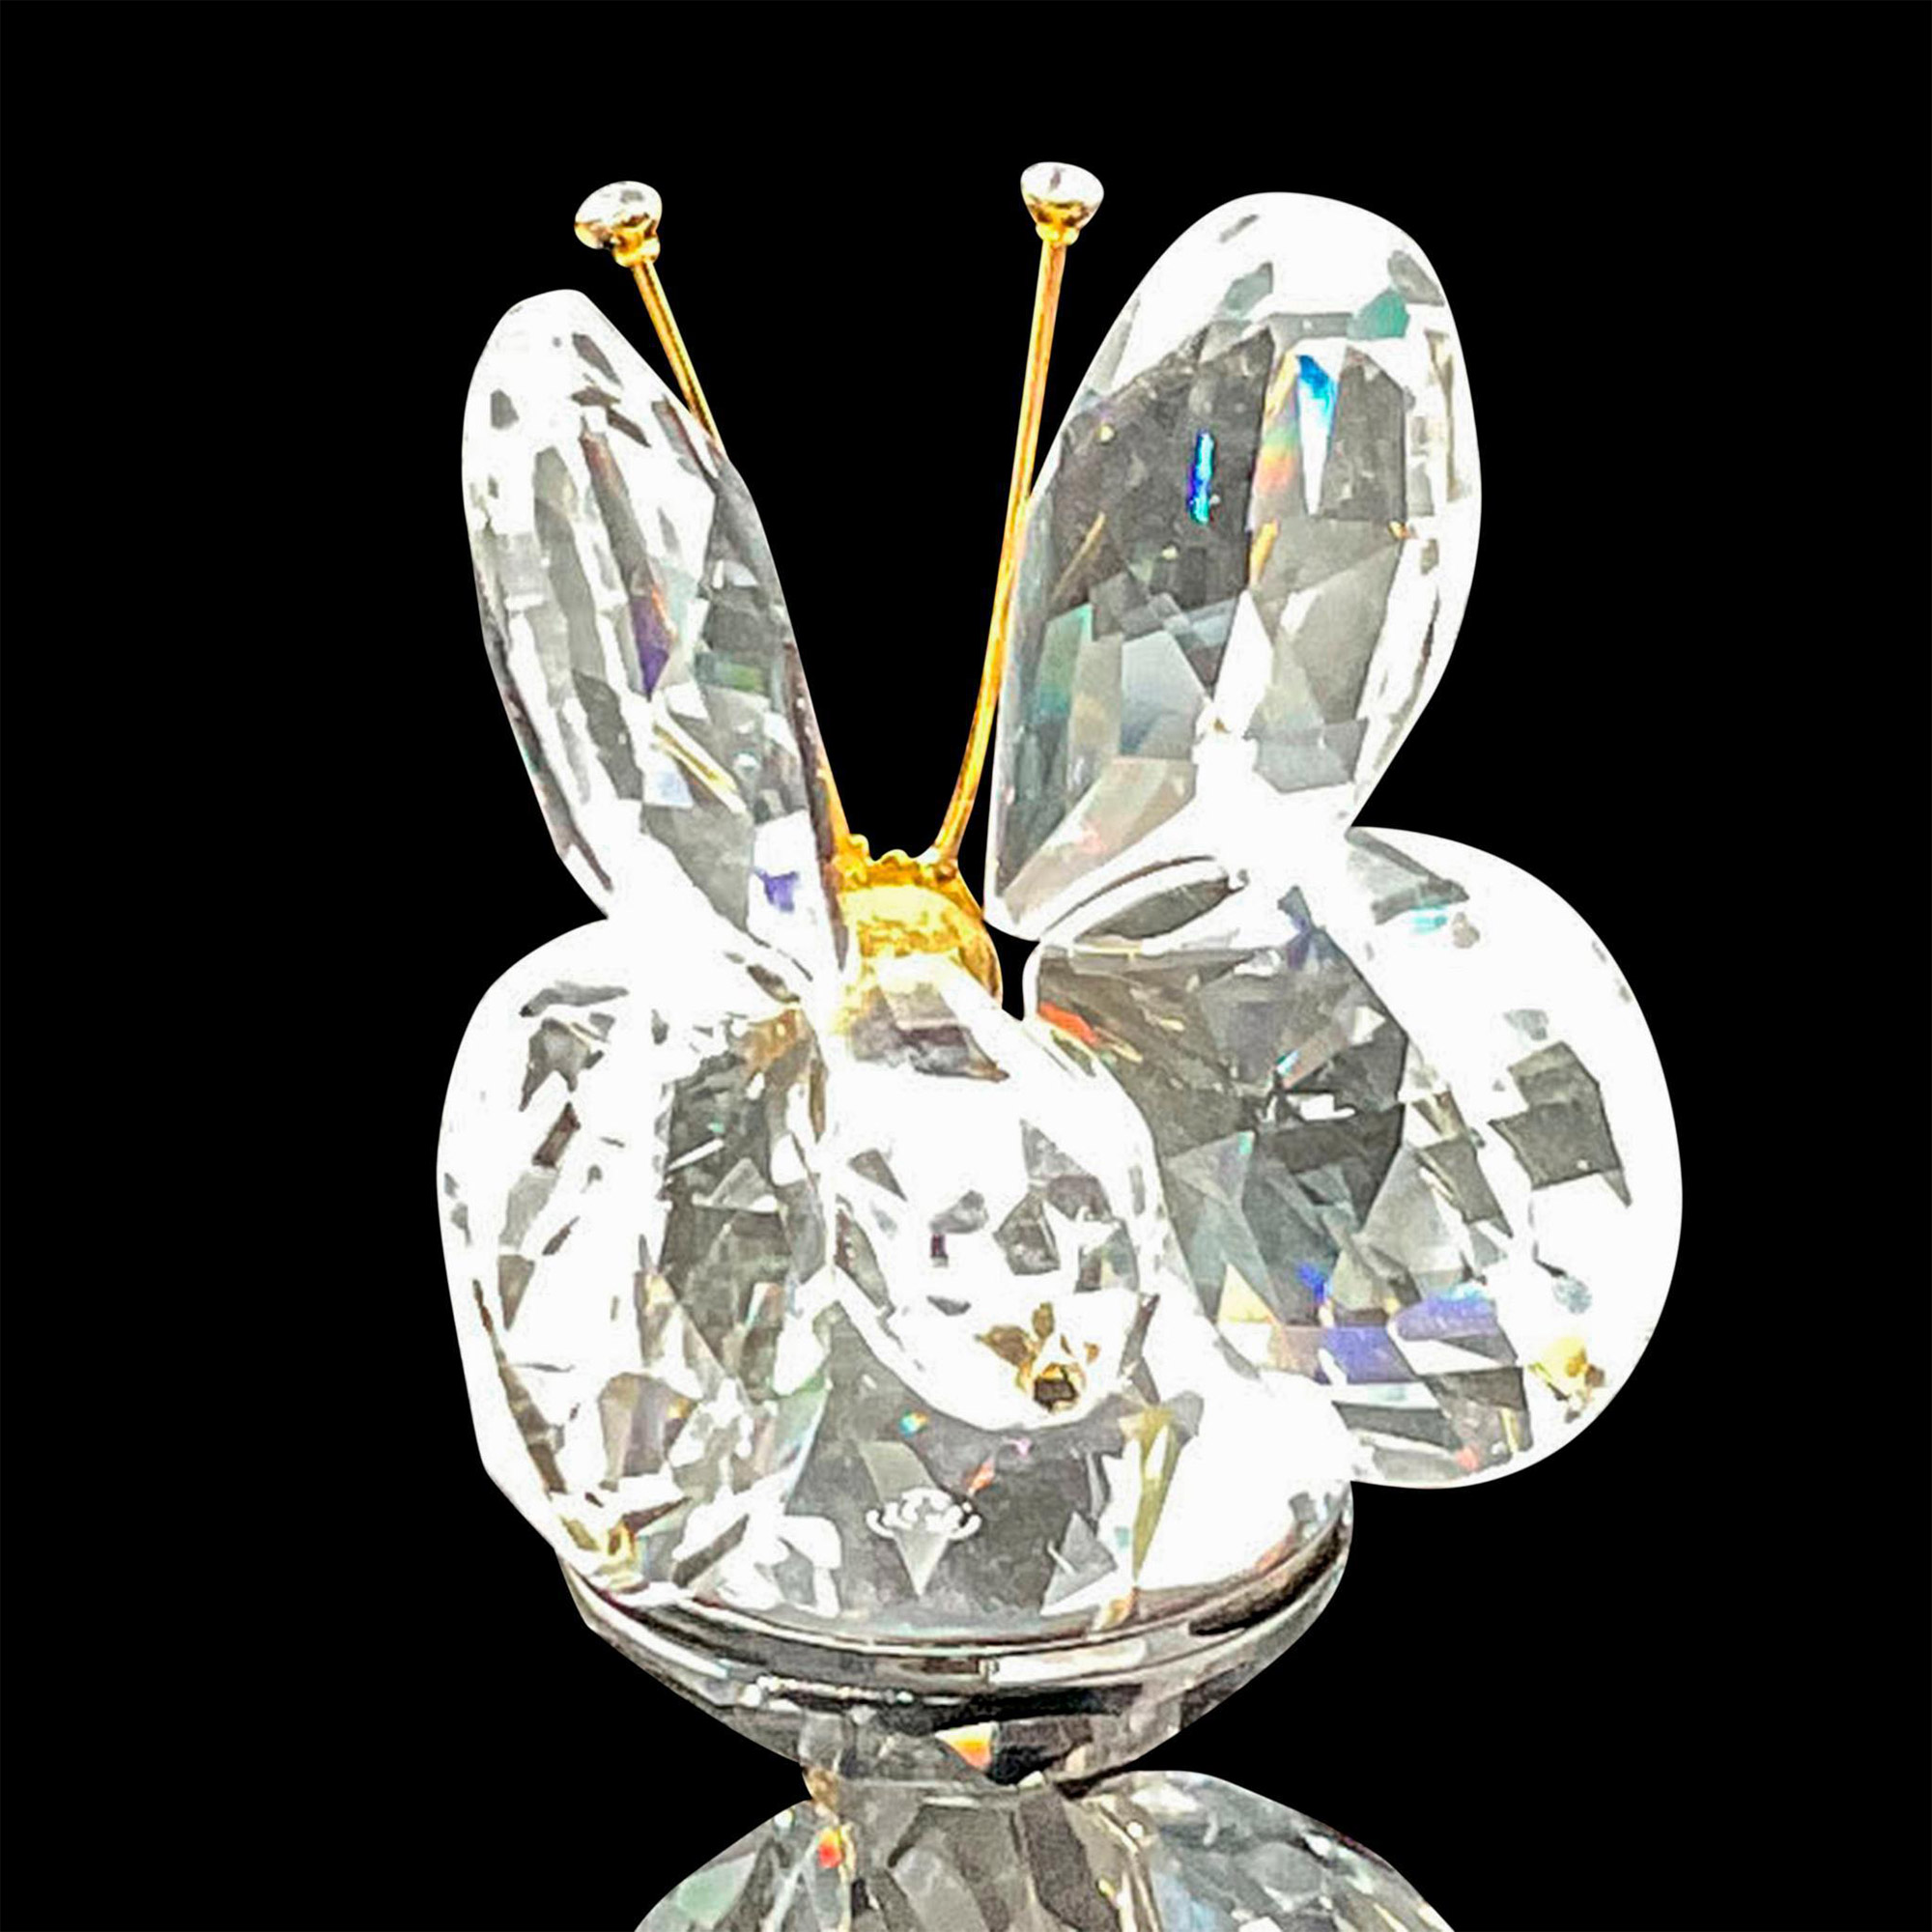 Swarovski Crystal Figurine, Butterfly with Gold Antennae - Image 2 of 4